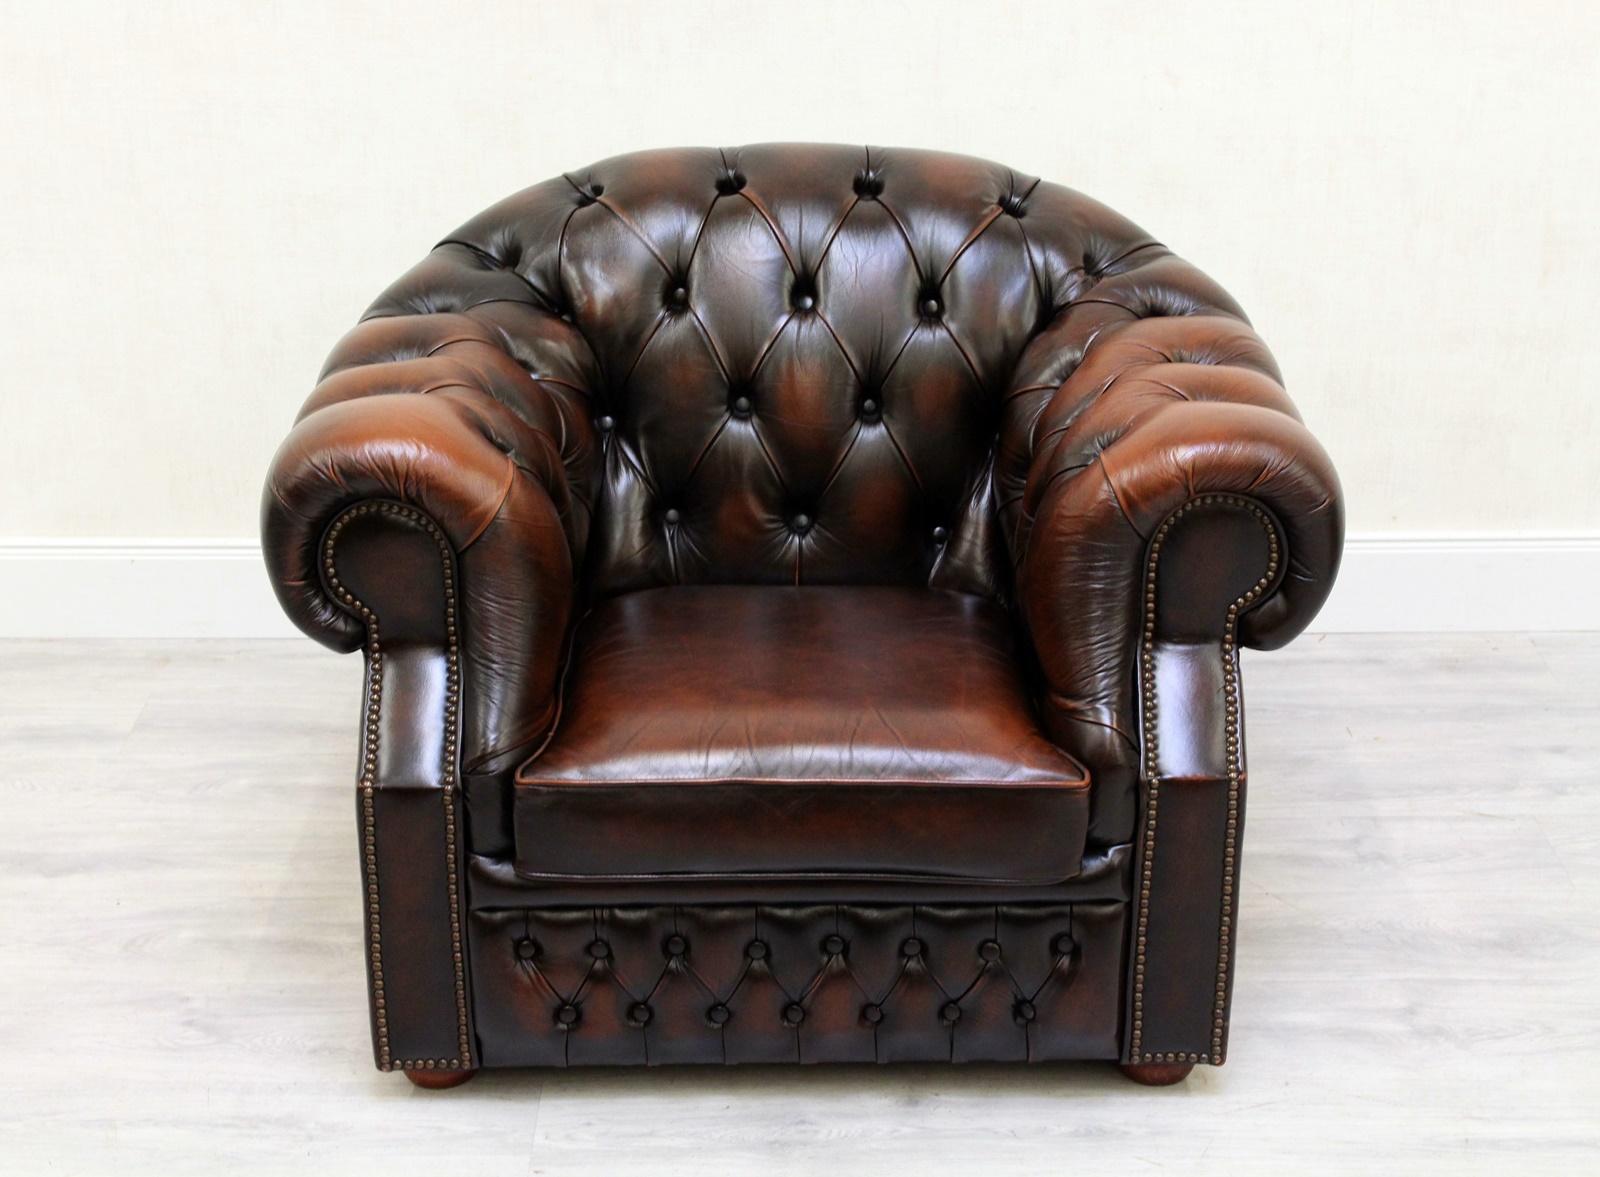 2 Chesterfield armchairs
The shape is very beautiful and extraordinary
Armchair
Height 80cm, width 100cm, depth 90cm
Wing chairs
Height 103cm, width 87cm, depth 85cm
Color: brown
Condition: The armchairs are in a very good condition for the